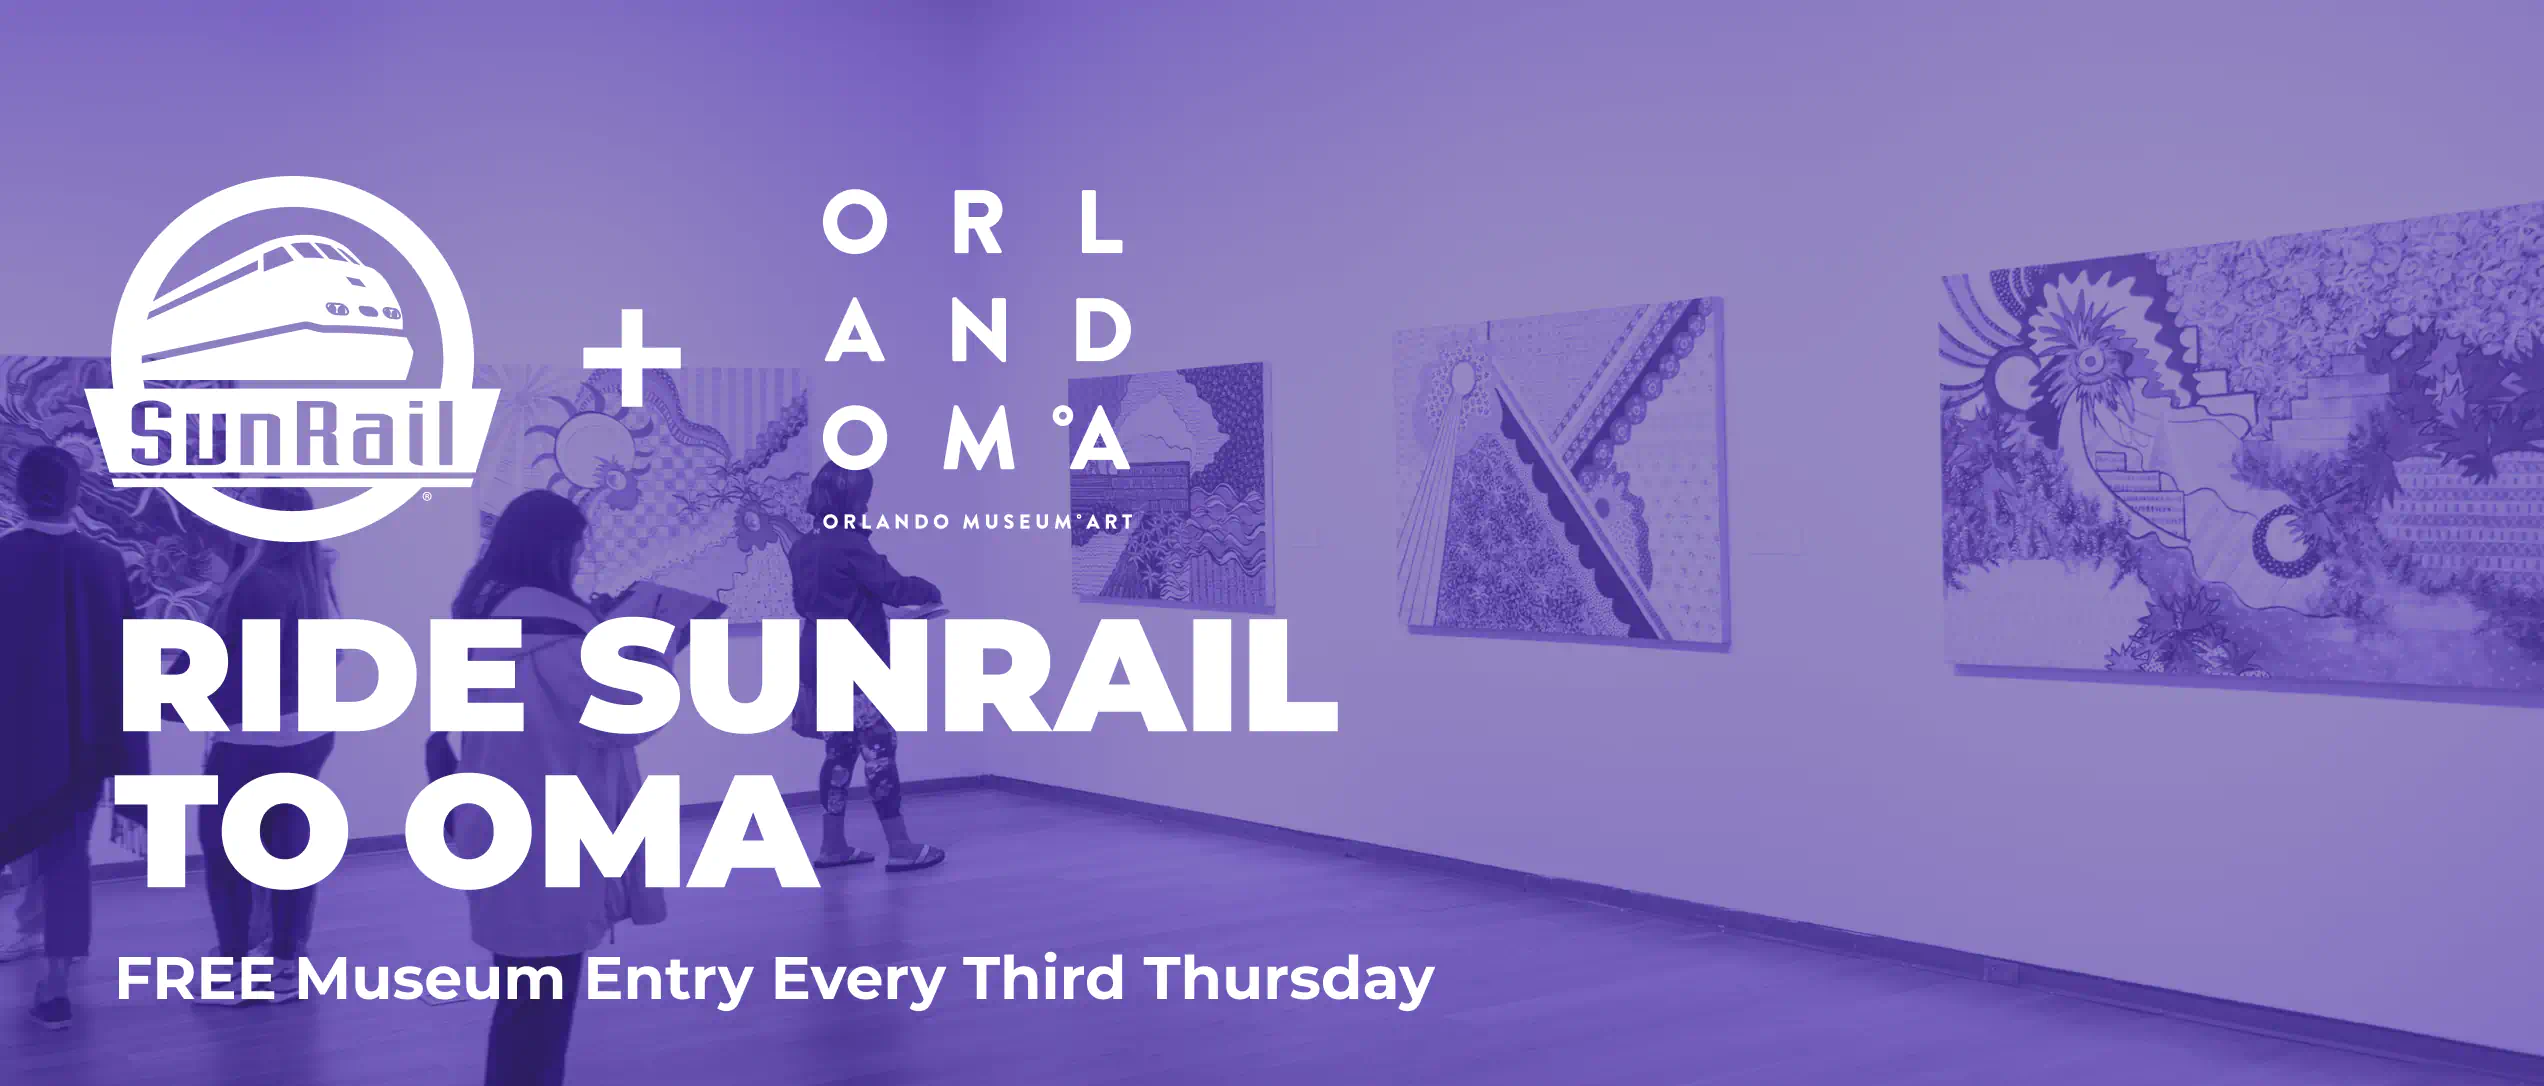 Ride SunRail to OMA - FREE Museum Entry Every Third Thursday